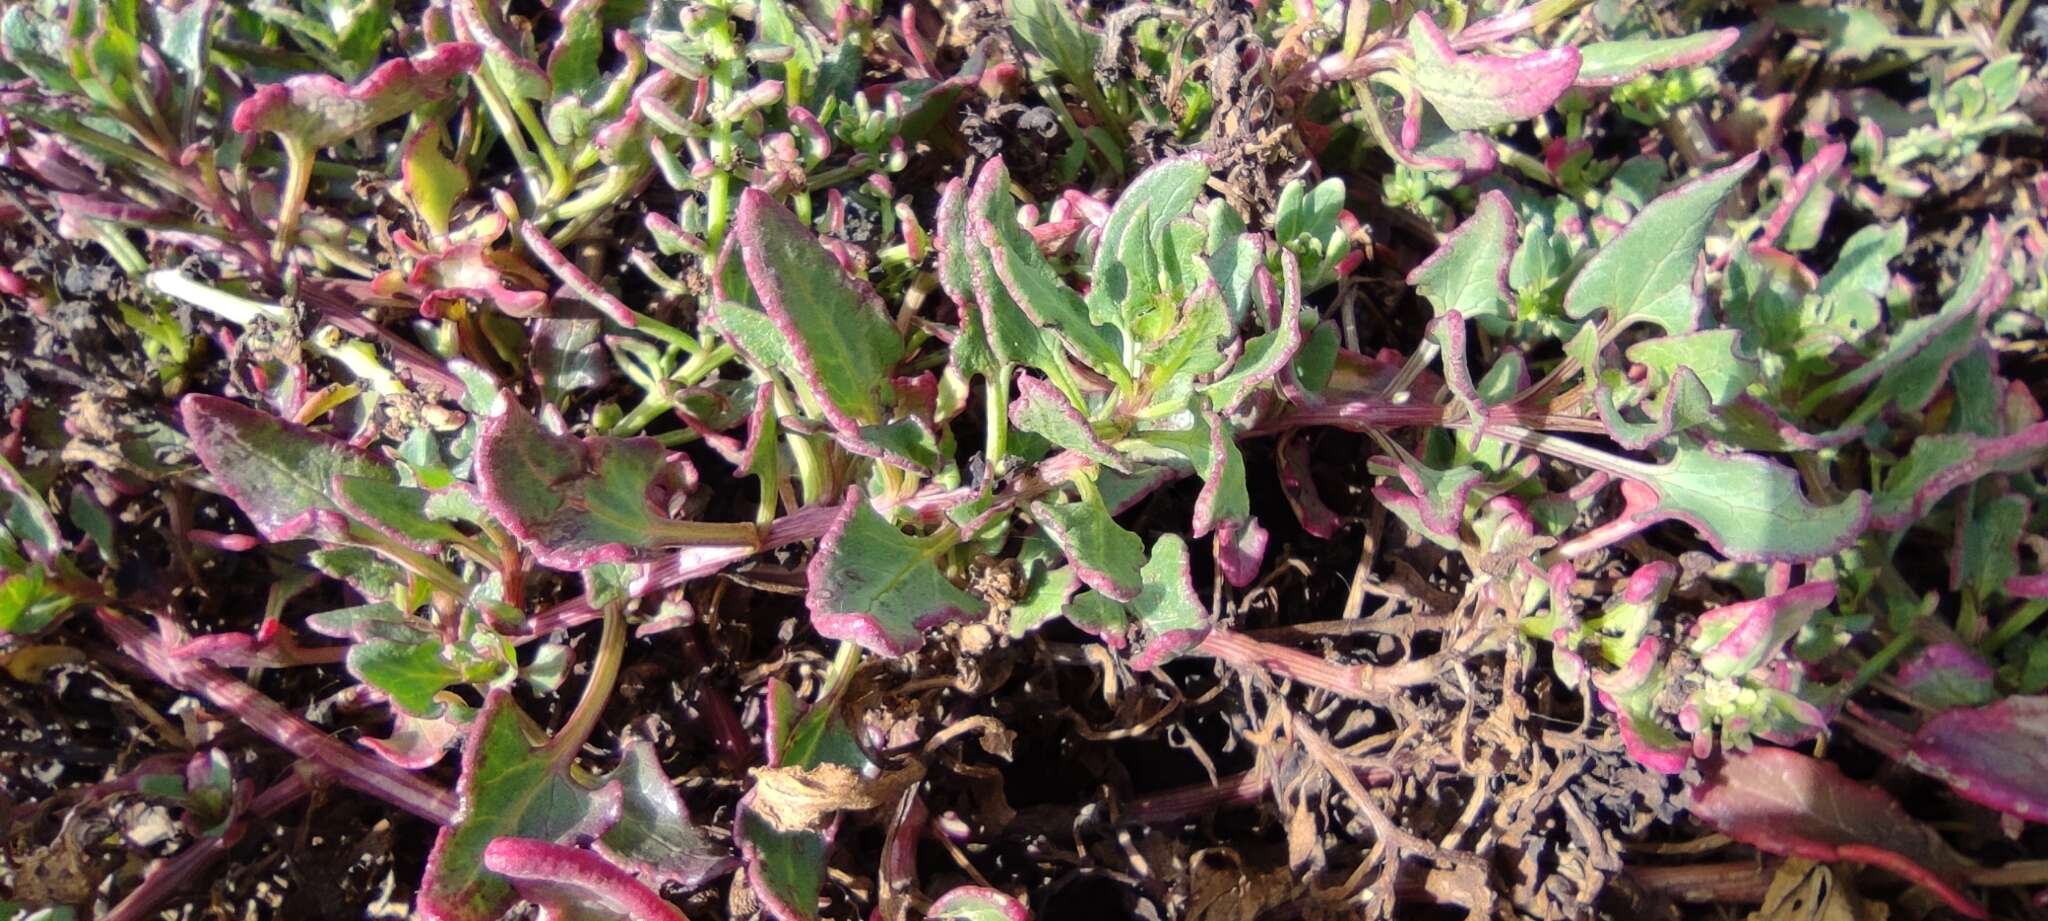 Image of cultivated beet